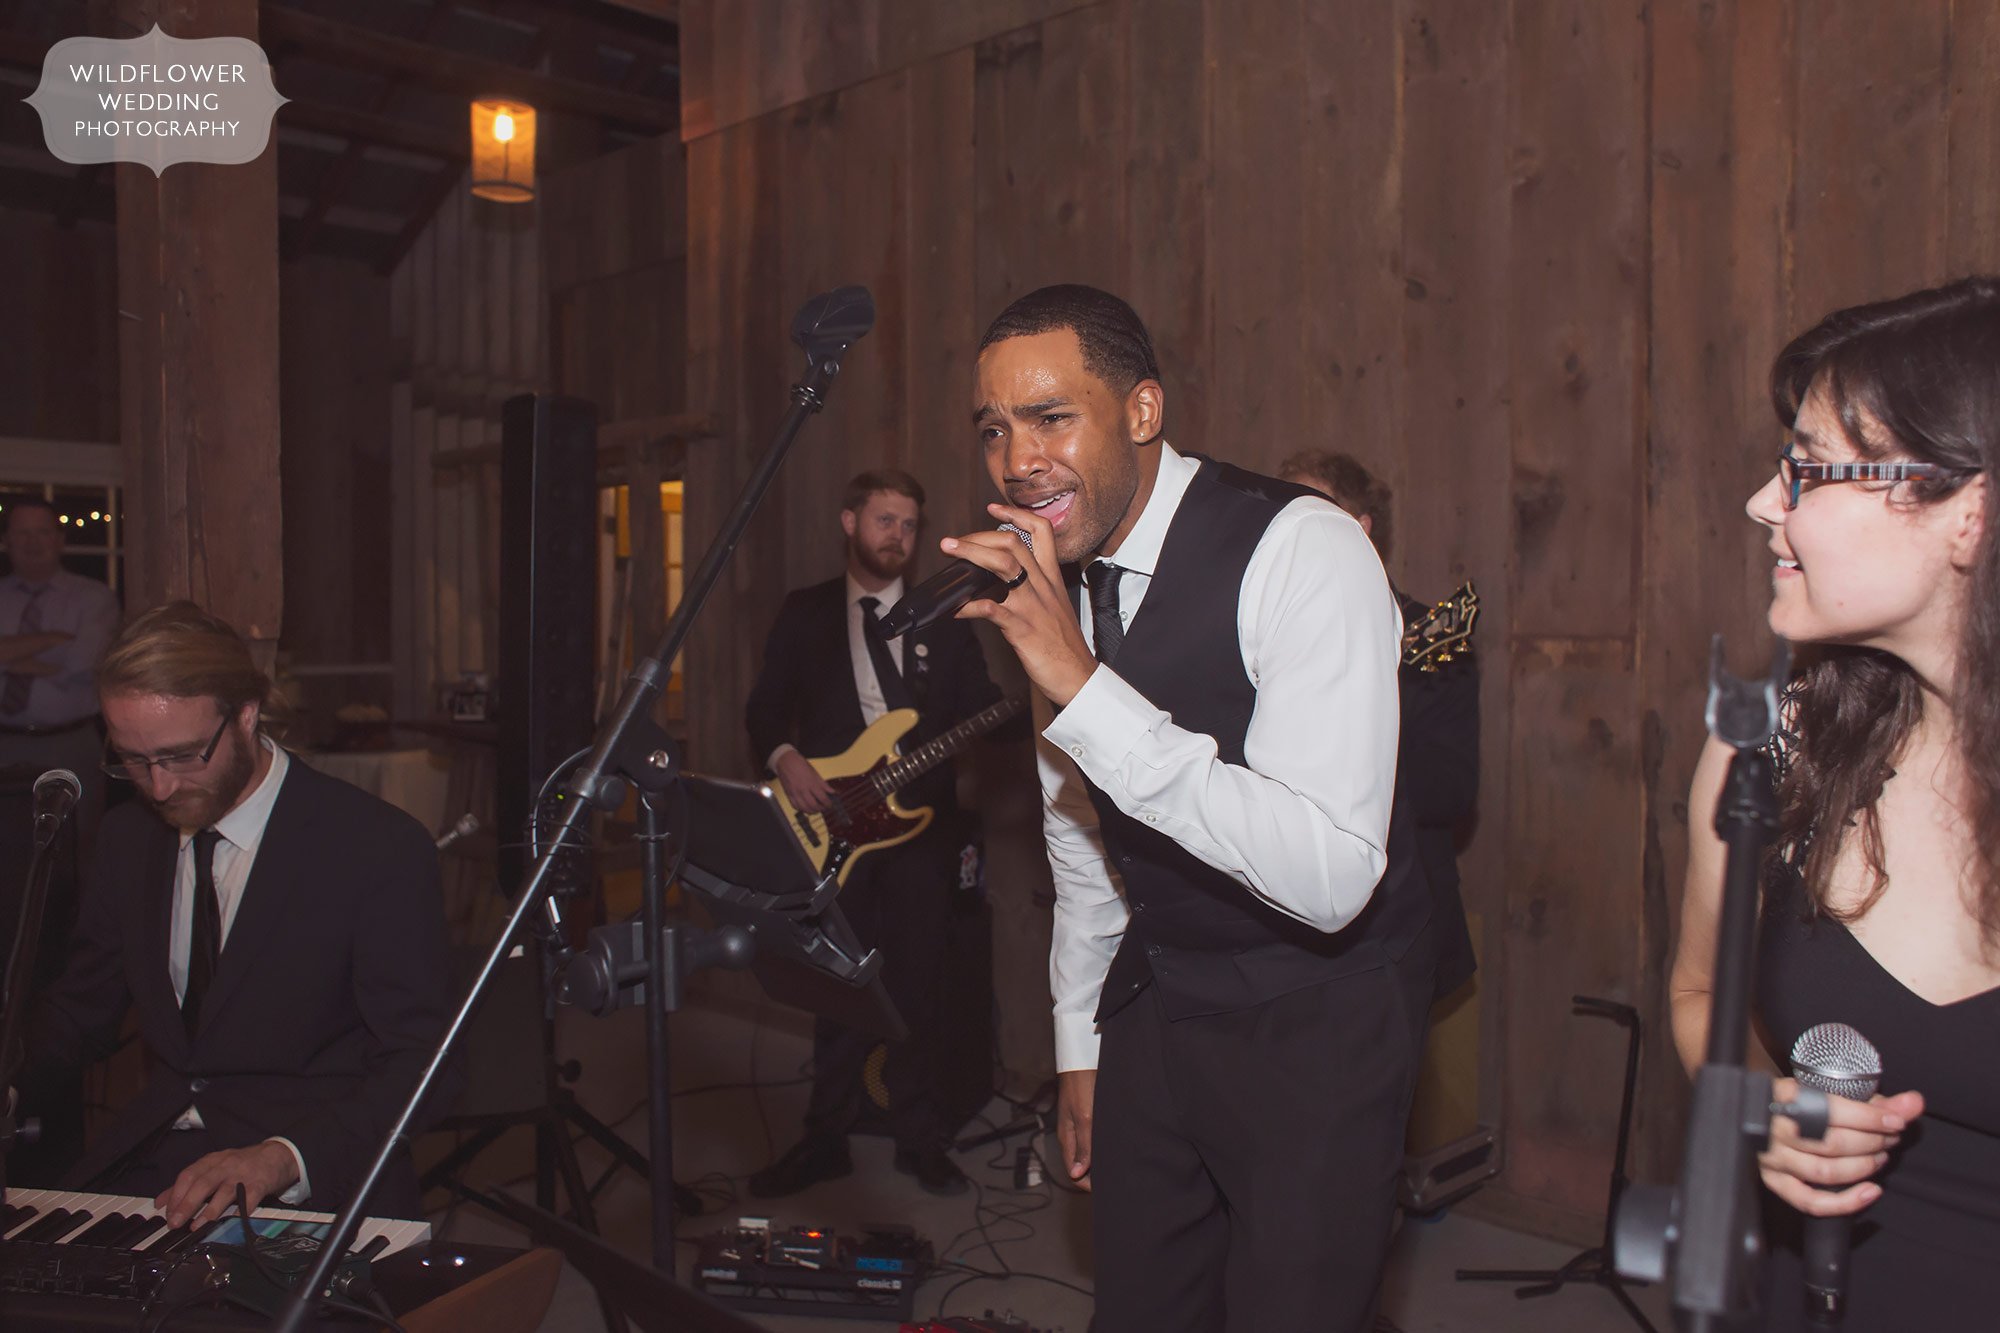 A live band performs in the barn for this rustic Weston, MO wedding reception.